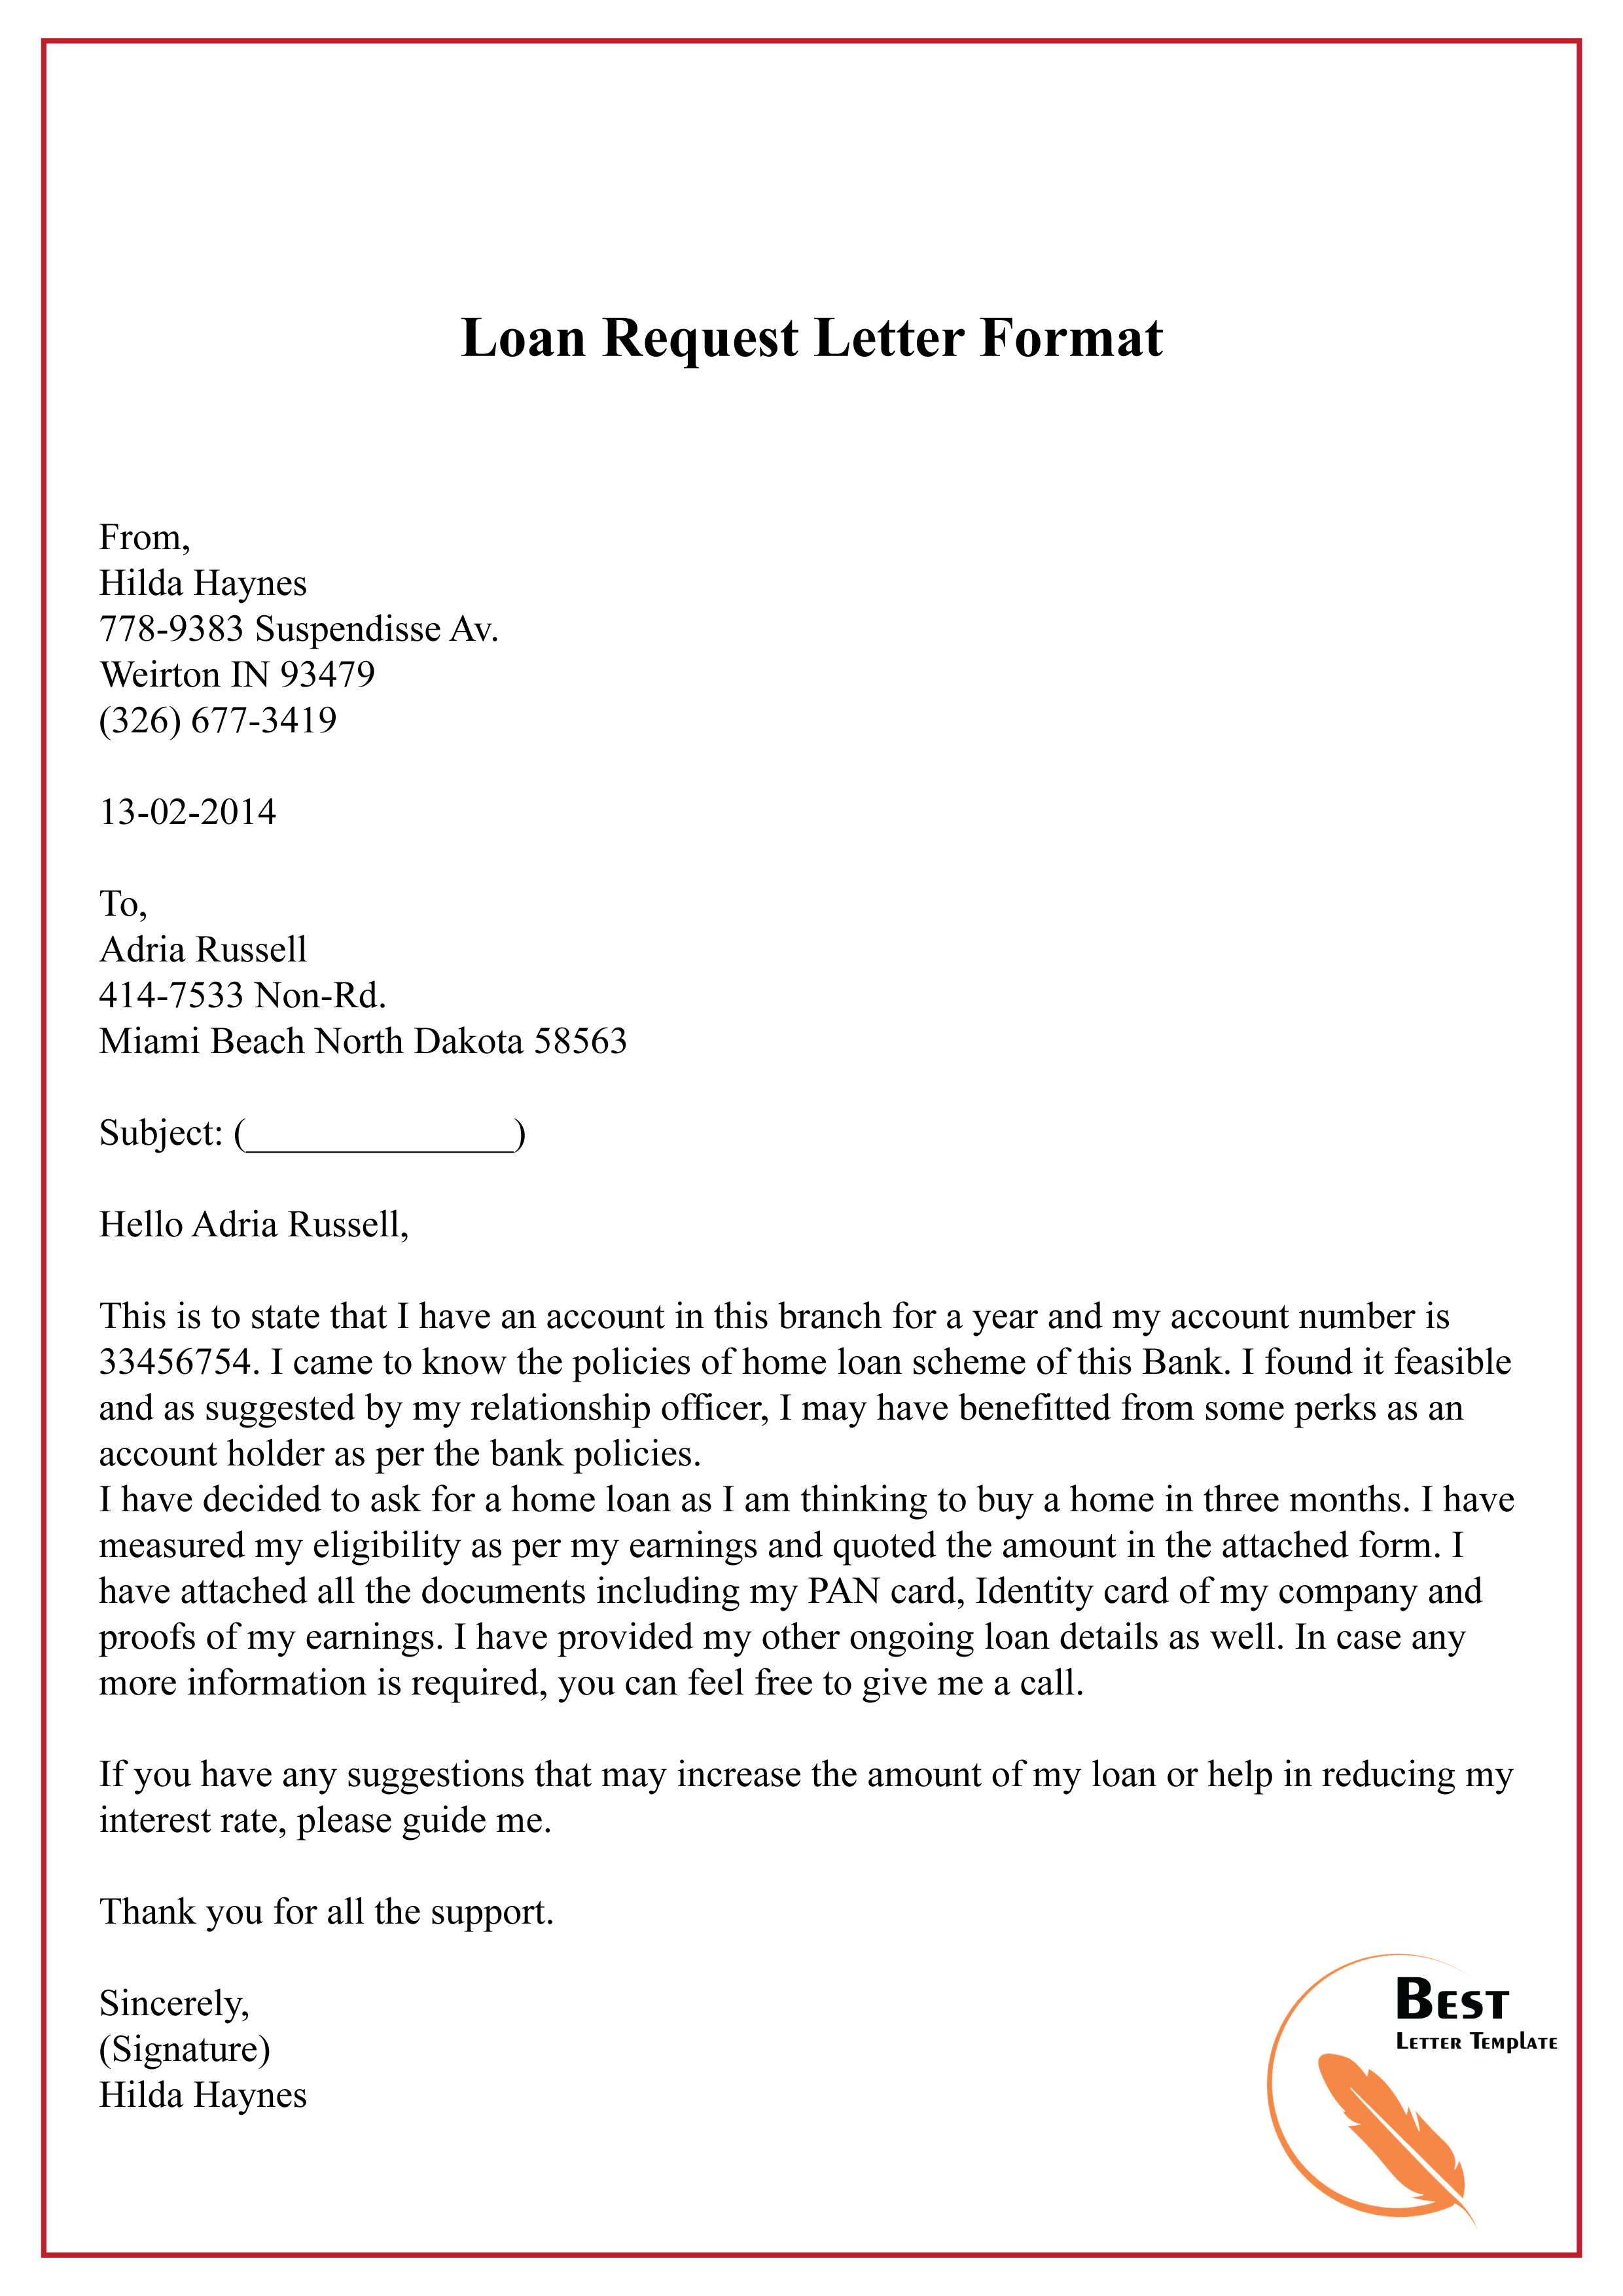 loan application letter to hr